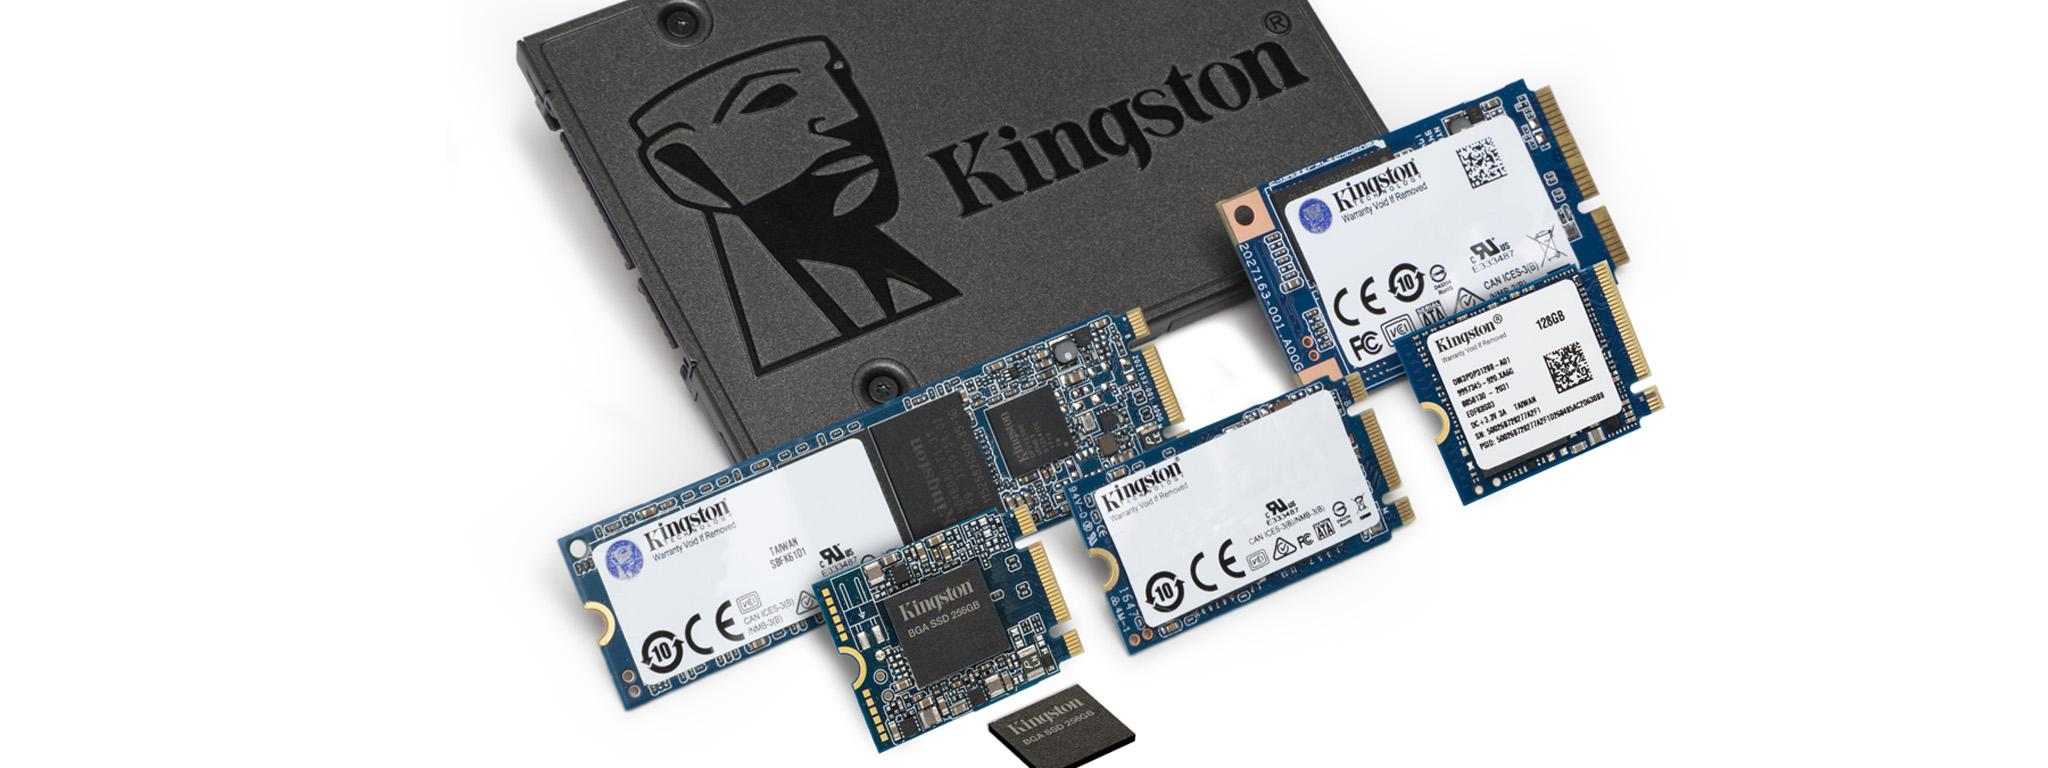 One SATA SSD, a 2230, 2280 and 2242 M.2 SSD, two mSATA SSDs and a BGA SSD package